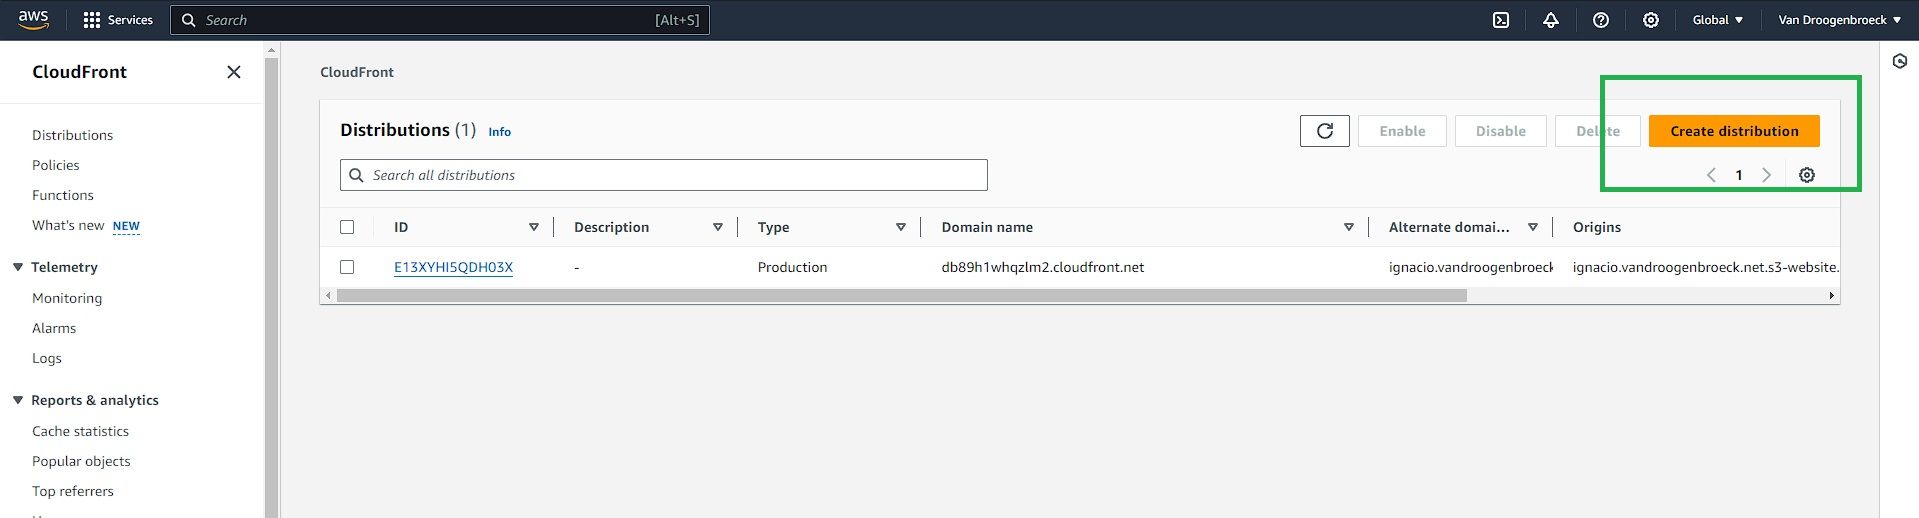 How to host a static website using AWS S3 and CloudFront - Part 1.